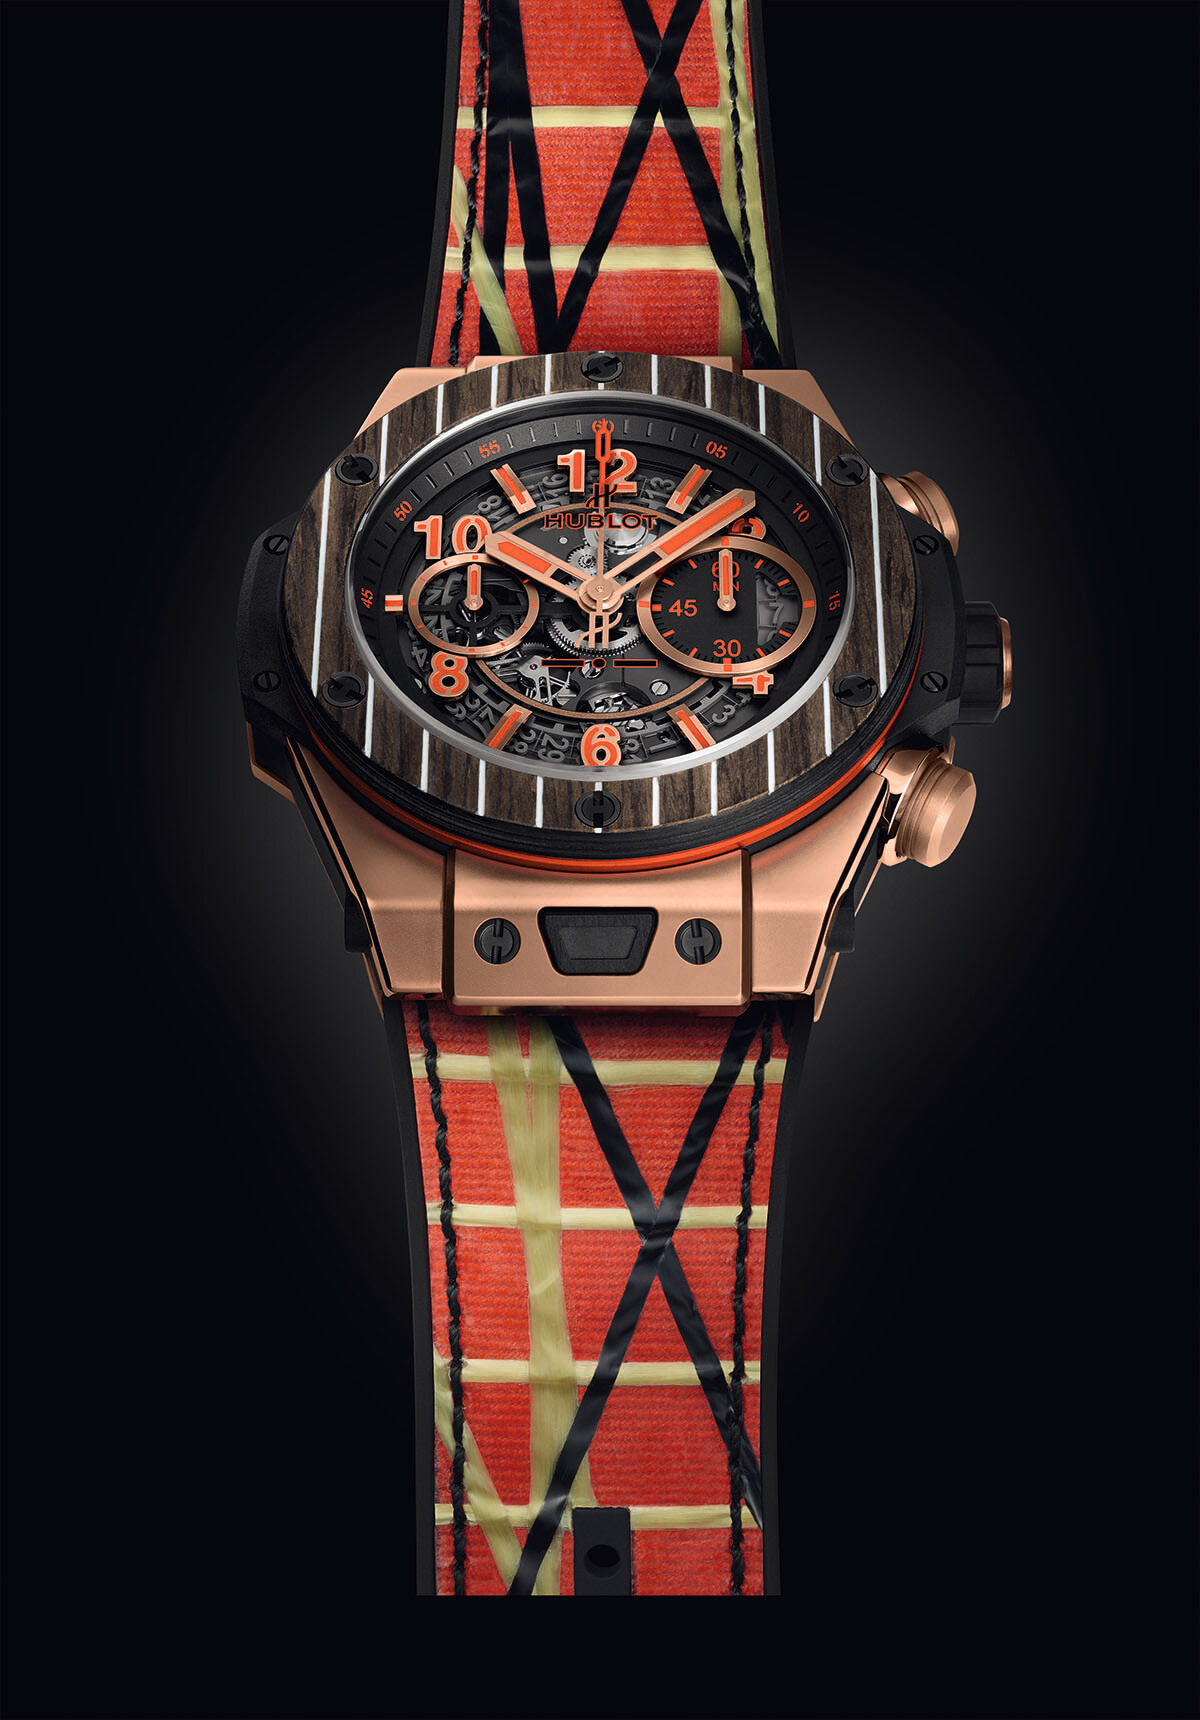 Hublot Big Bang special edition watch with red and gold striped strap 